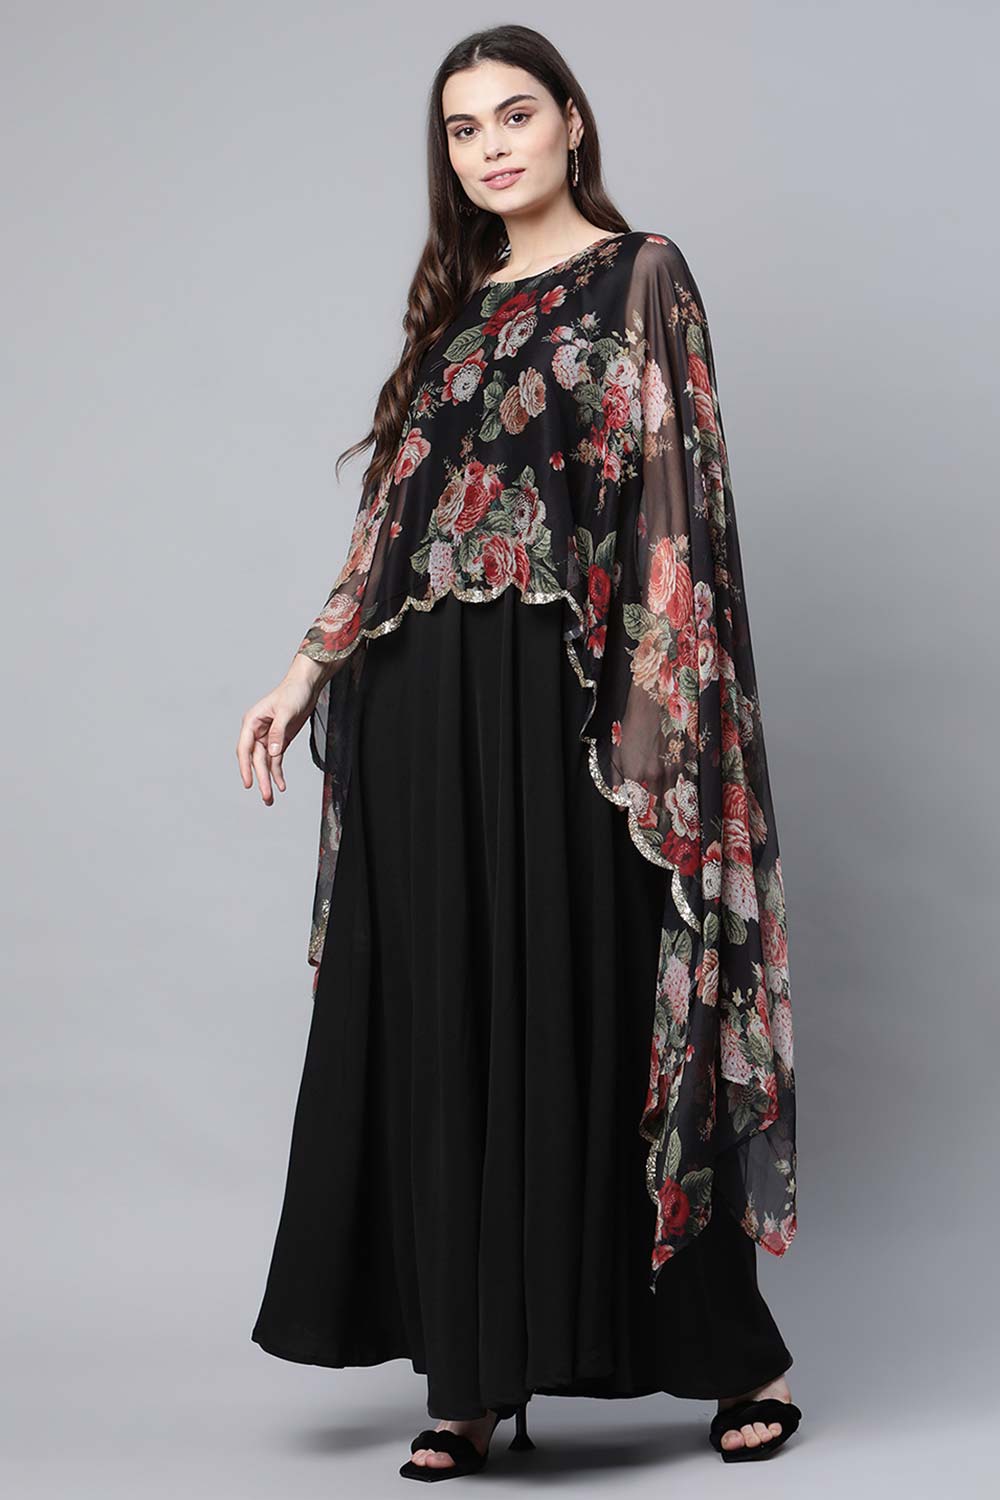 Black Crepe Dress With Attached Dupatta